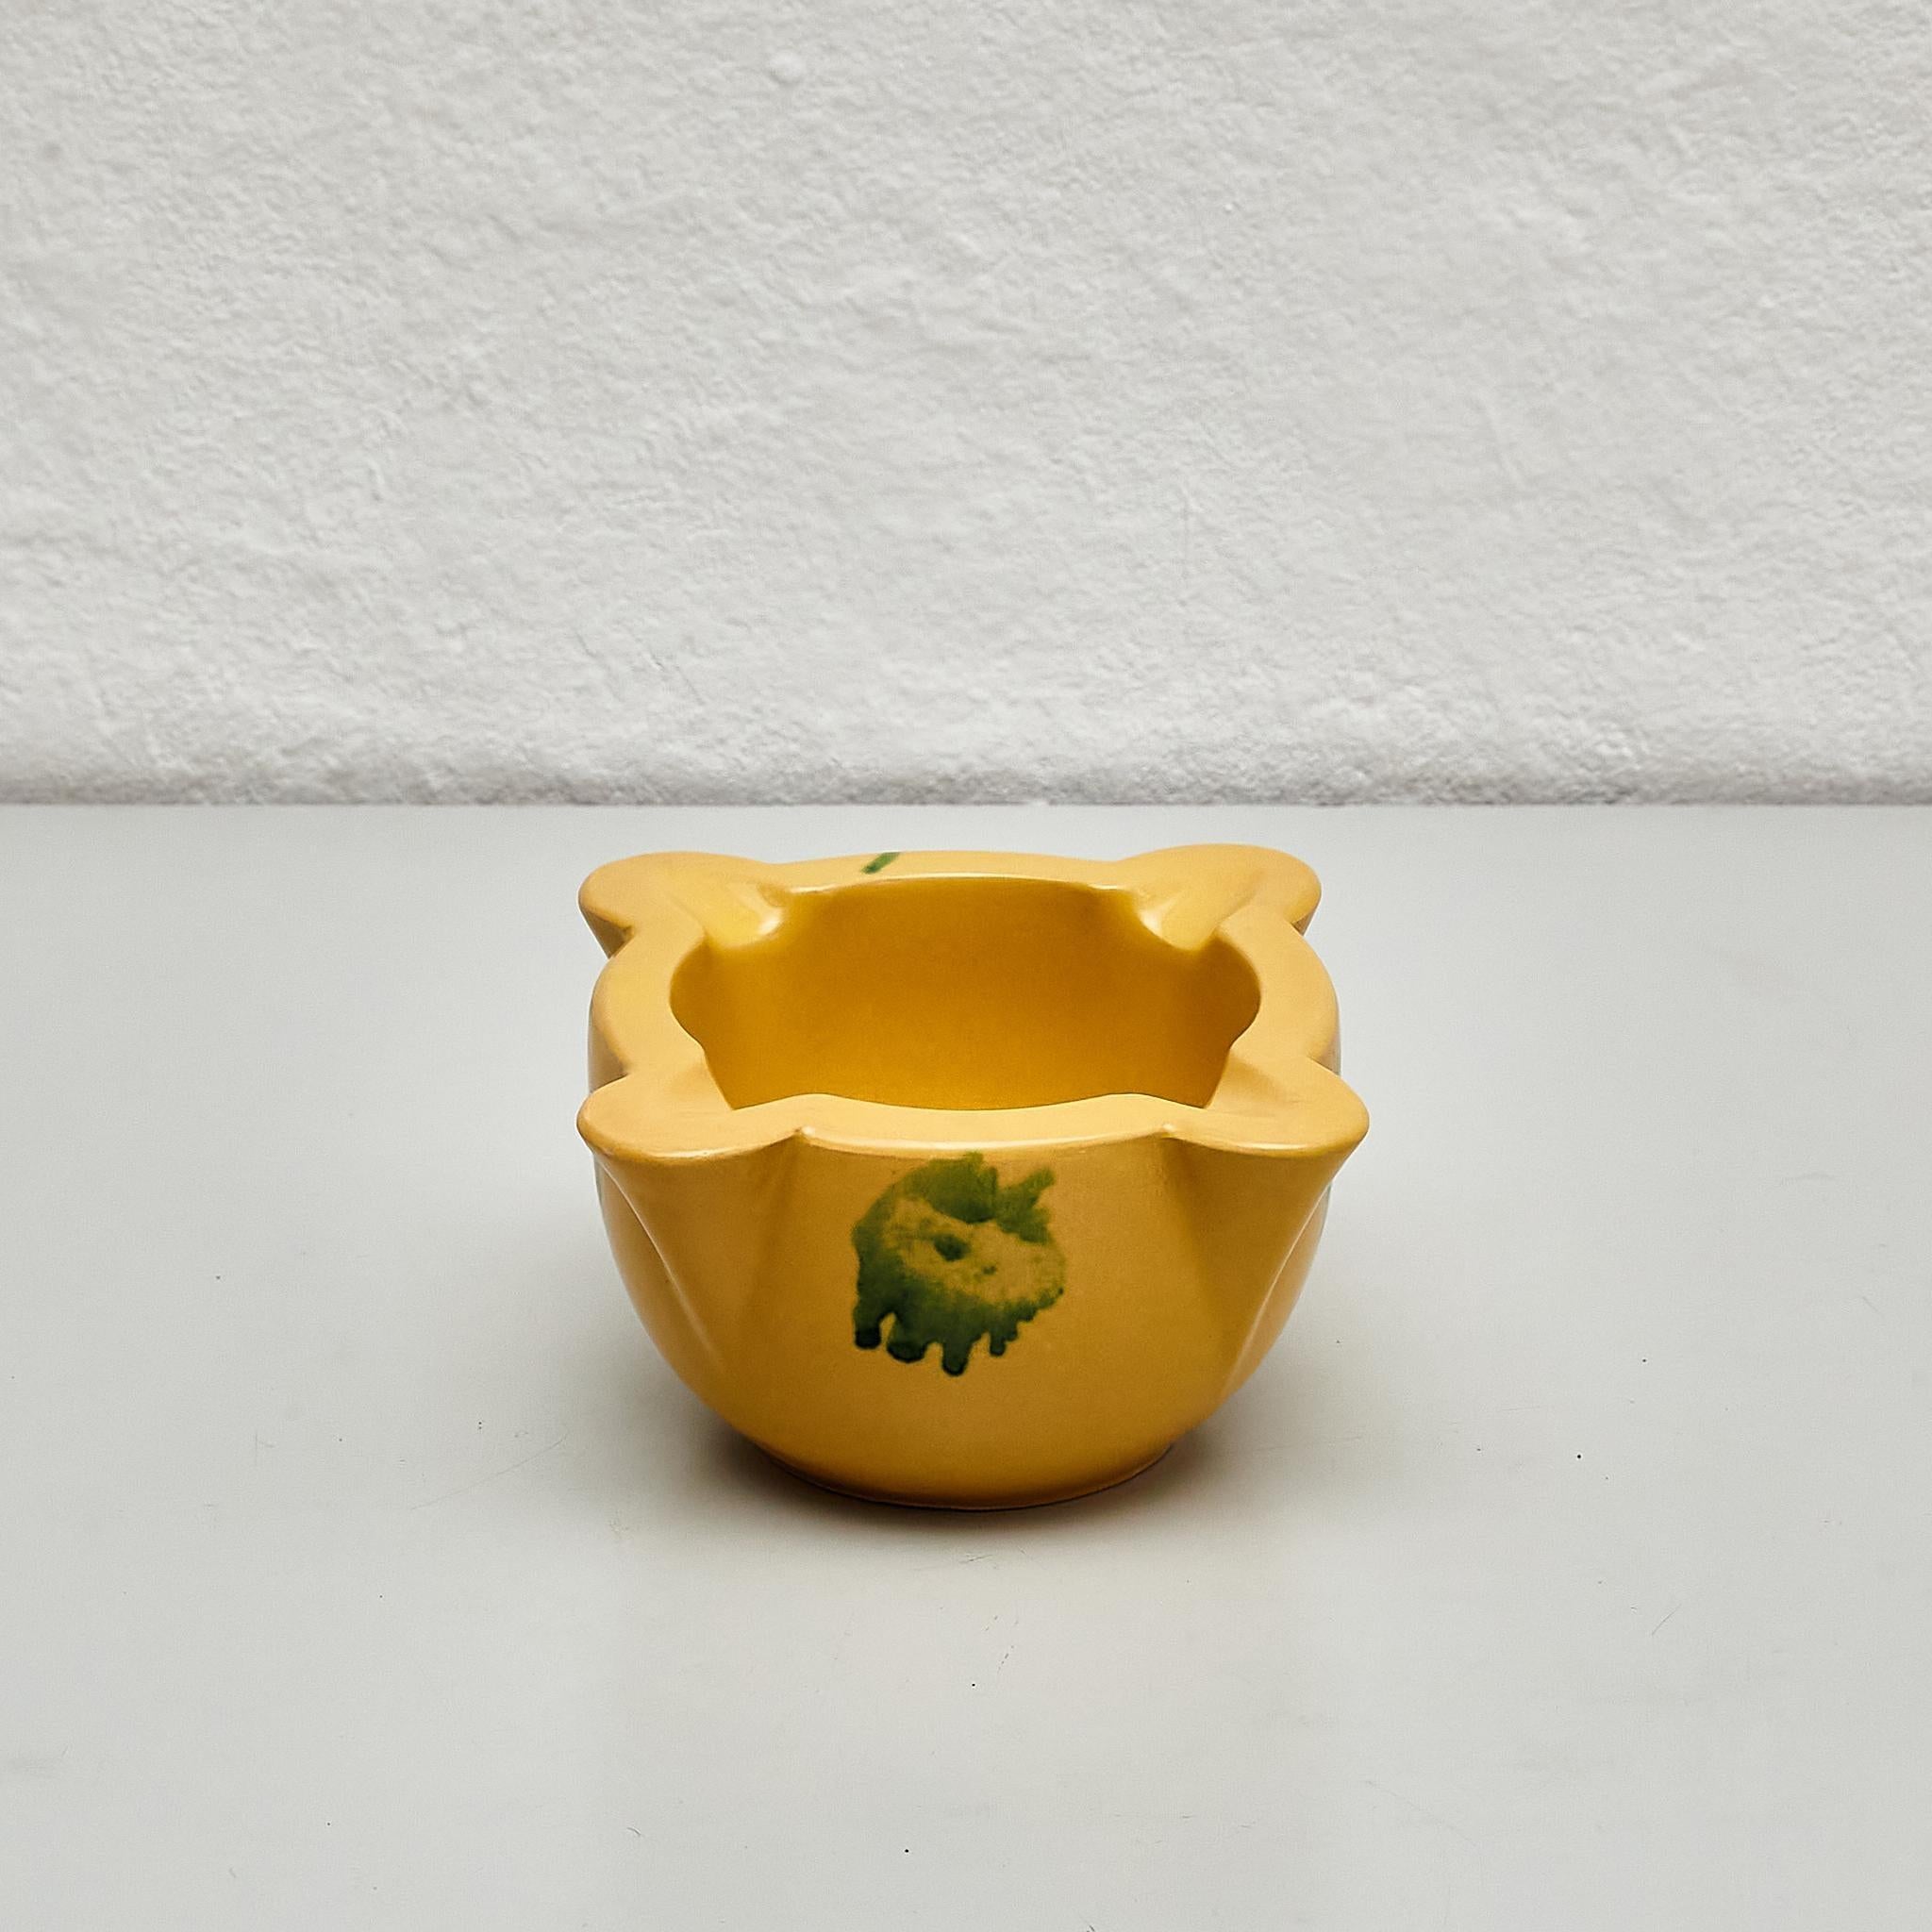 Antique vintage yellow ceramic mortar. 

Made by unknown manufacturer in Spain circa 1970.

In original condition, with minor wear consistent with age and use, preserving a beautiful patina.

Materials:
Ceramic

Important information regarding